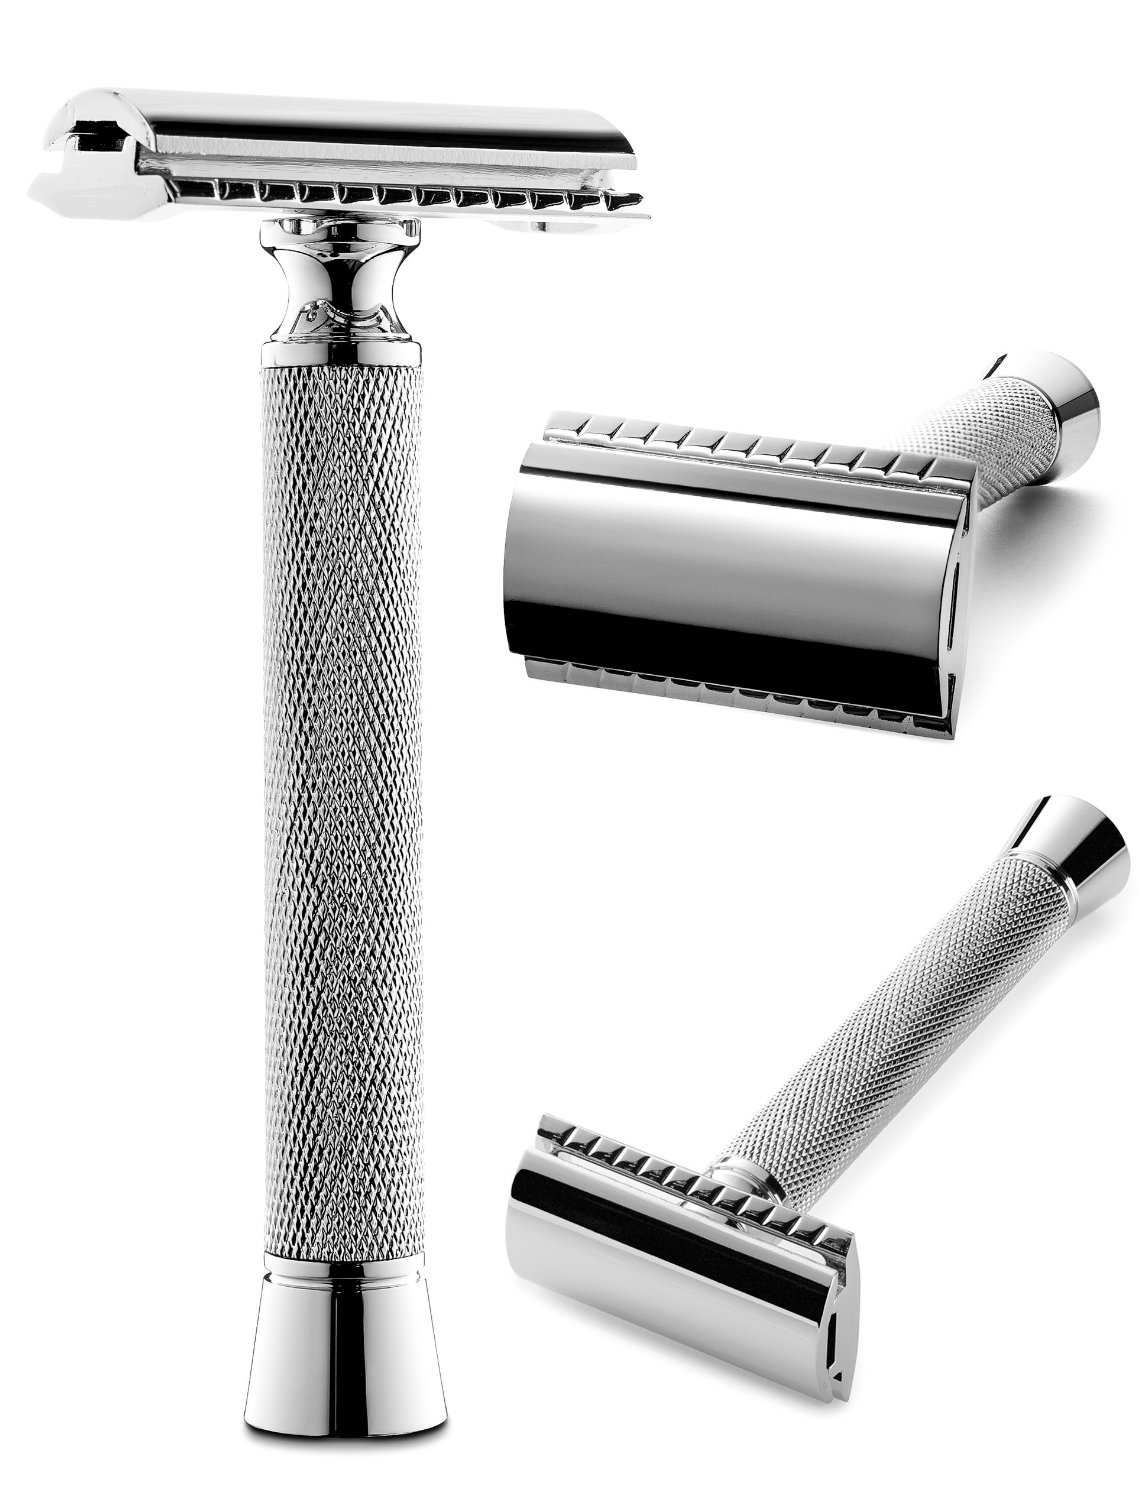 How To Master Shaving Using A Safety Razor?